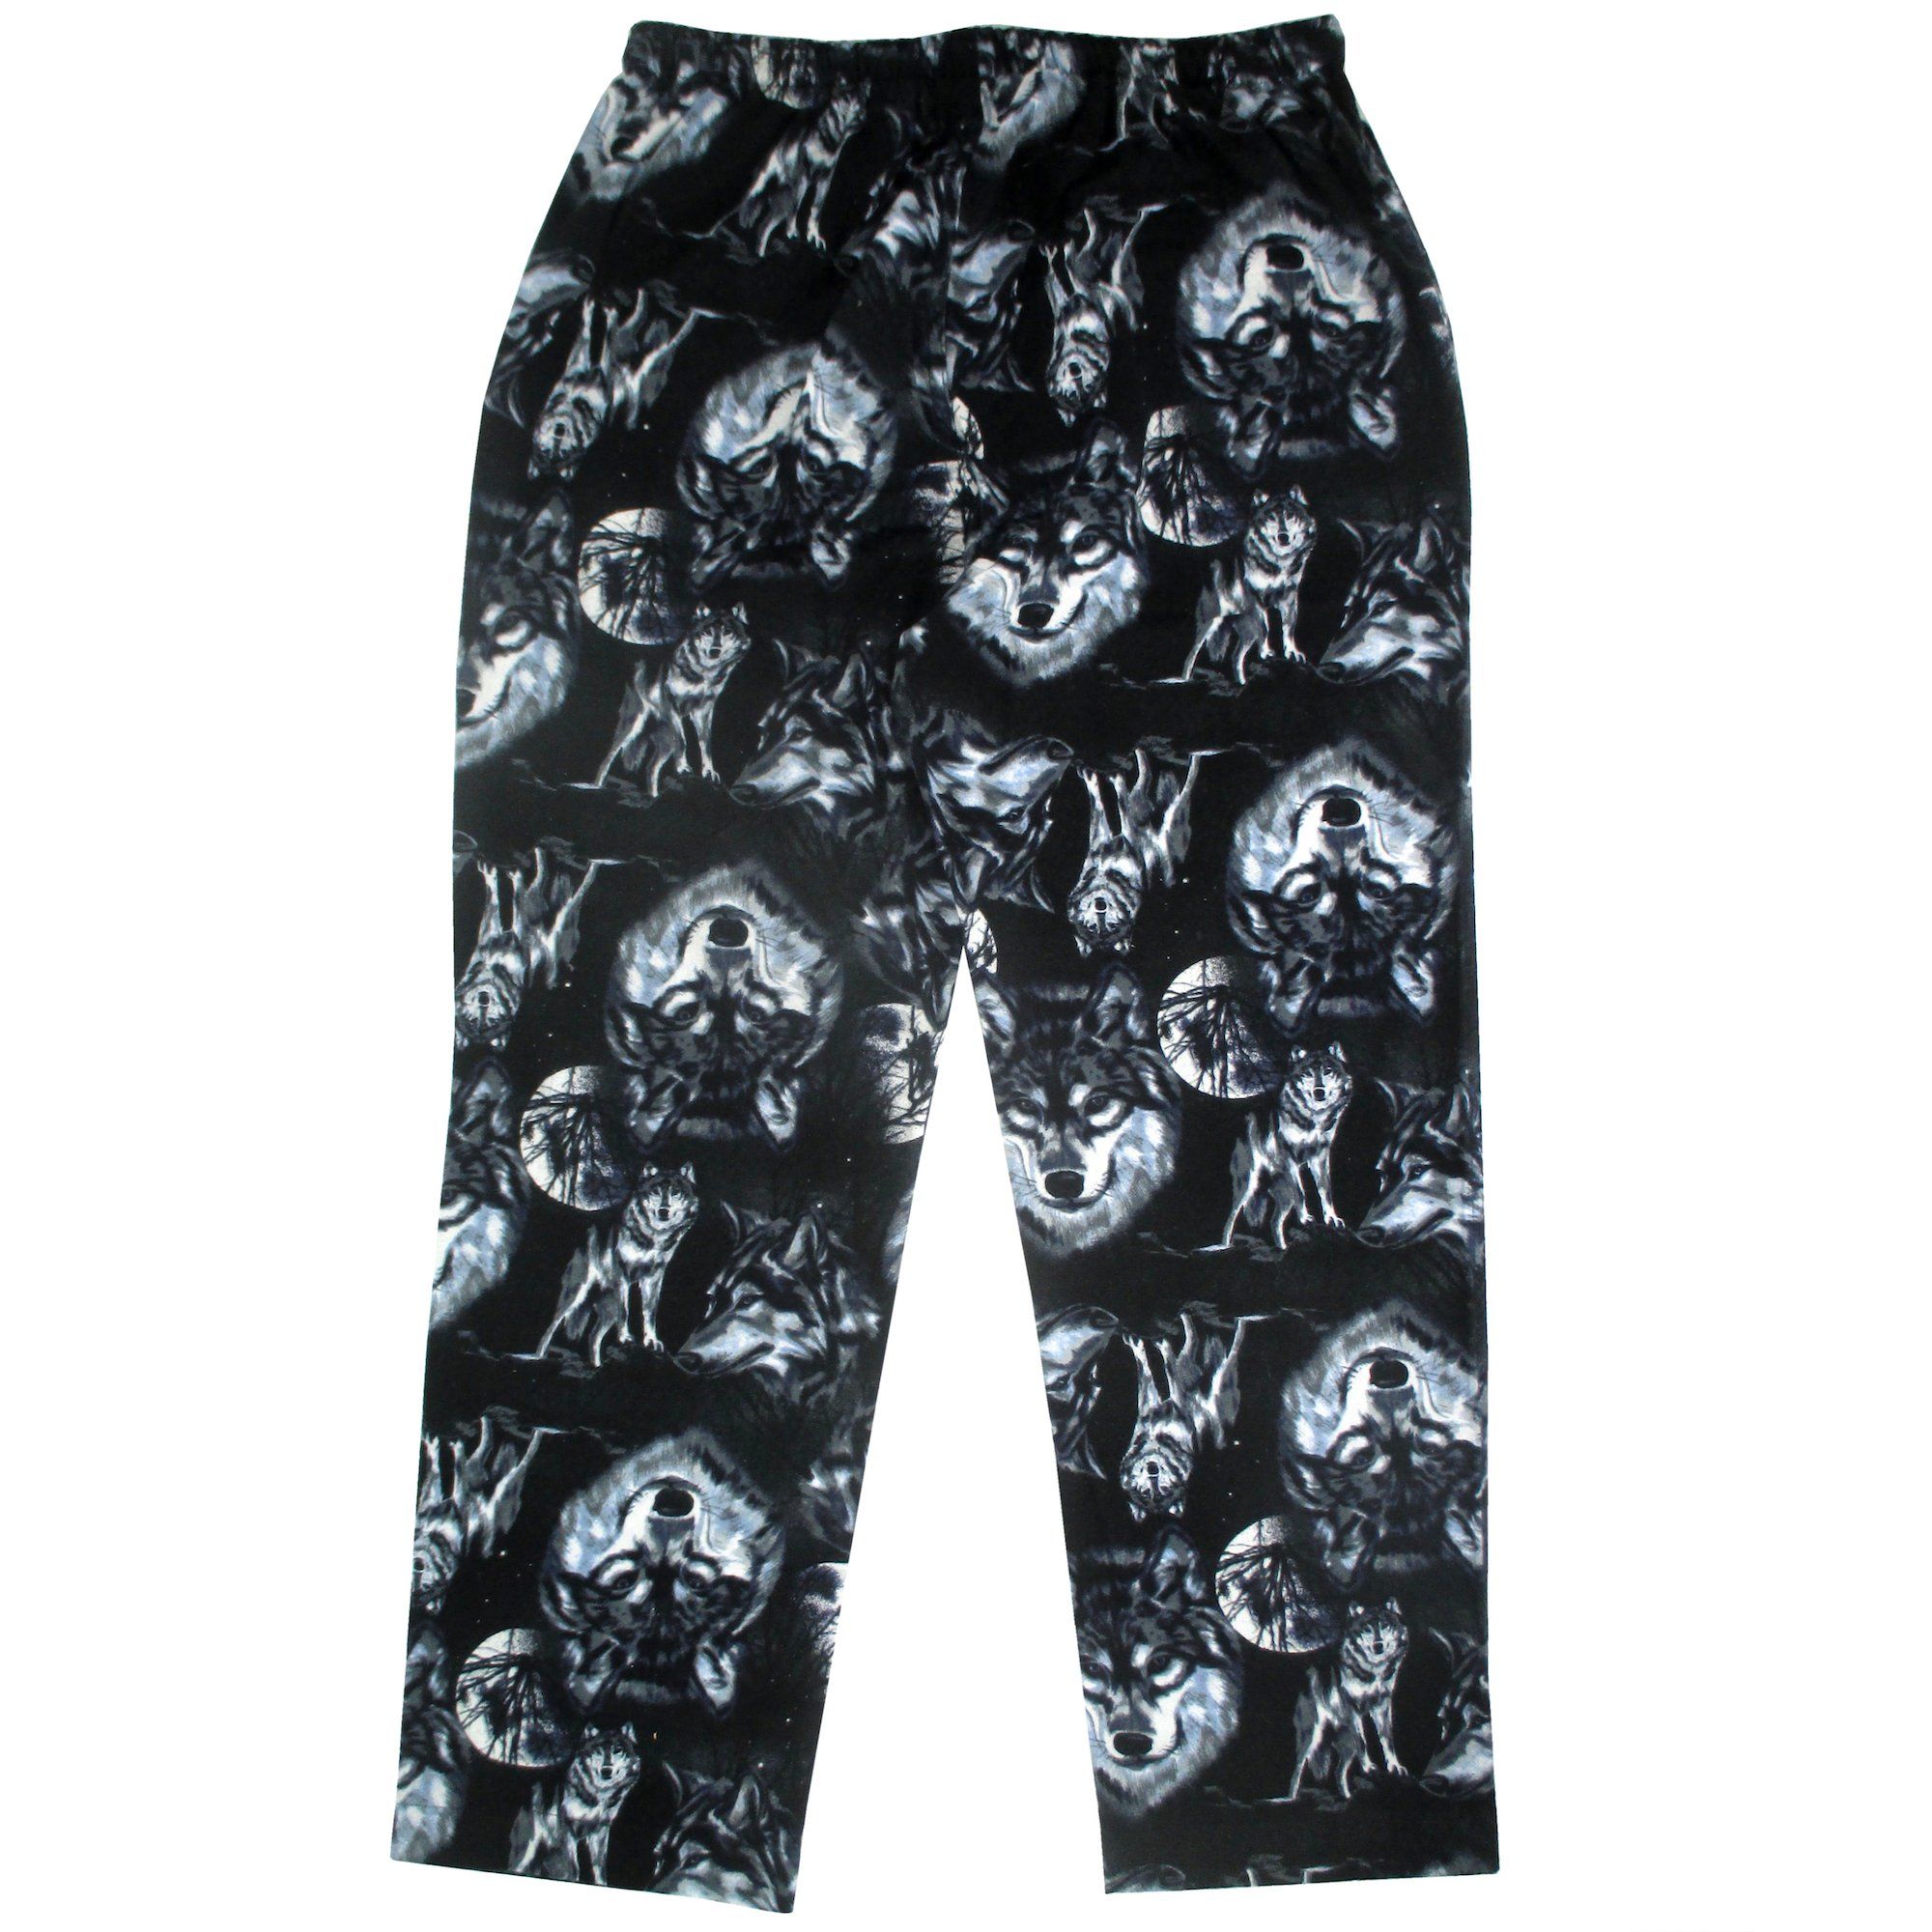 Wolves All Over Print Soft Warm Cotton Flannel Pj Pajama Pants for Men